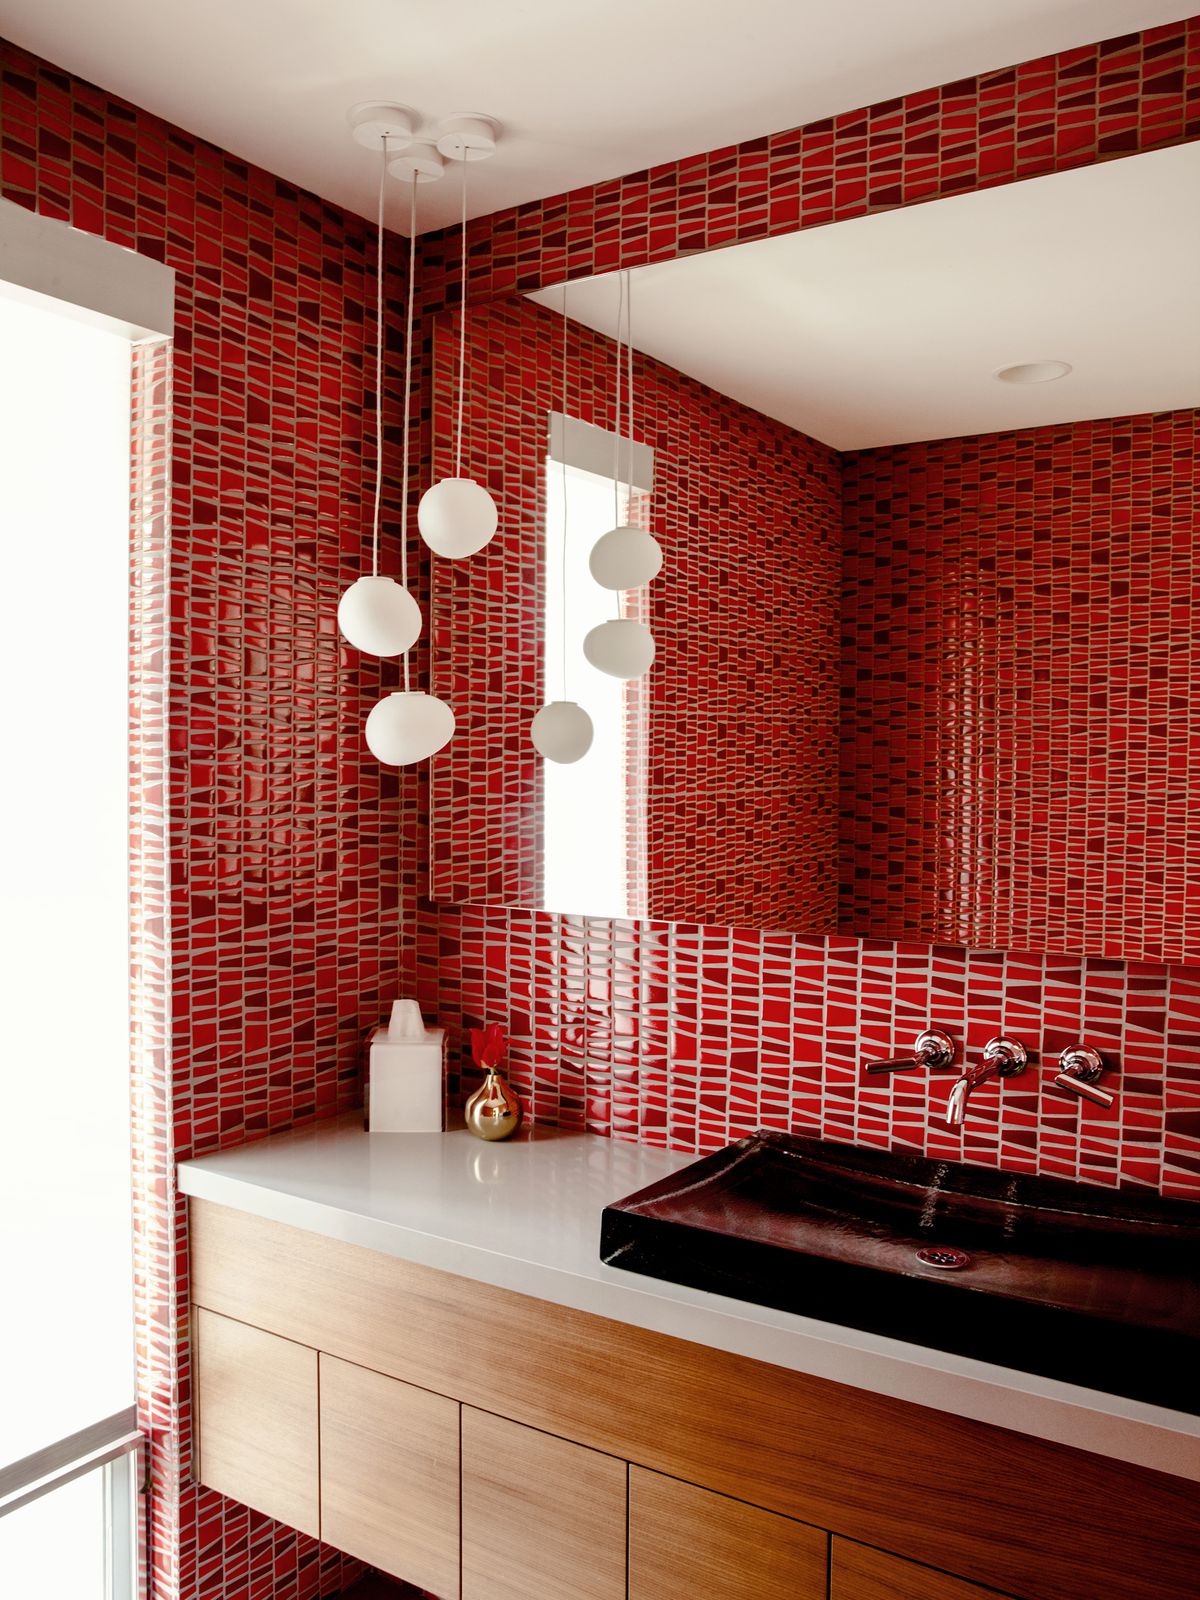 A powder room is covered in bright red tile.